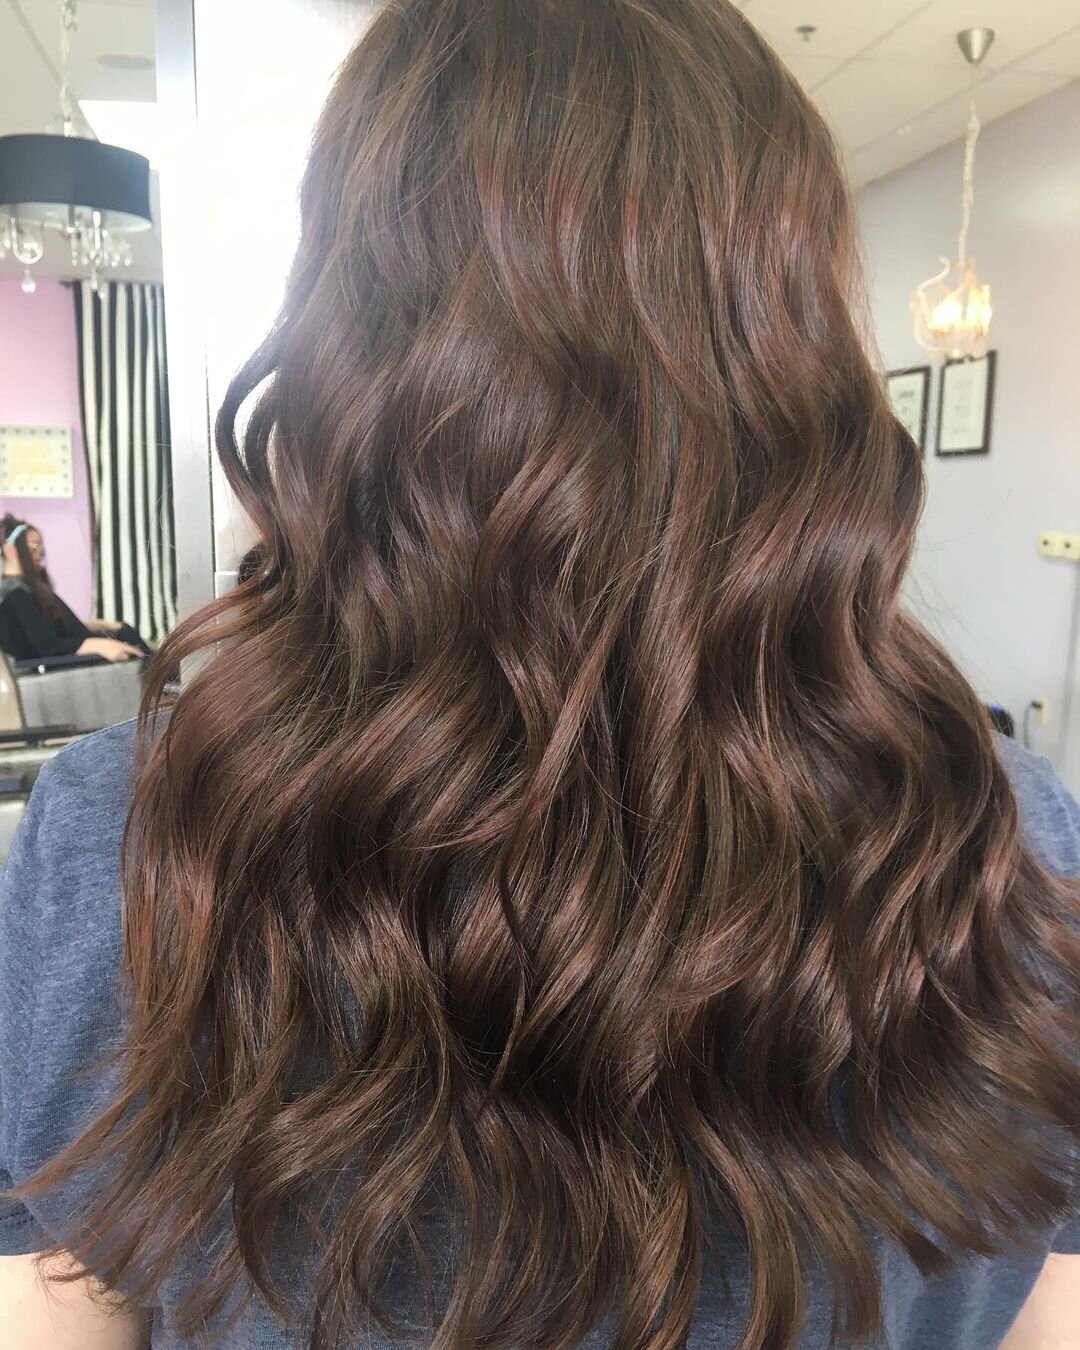 Chocolate Brown Hair Color on Long Layers by Cody